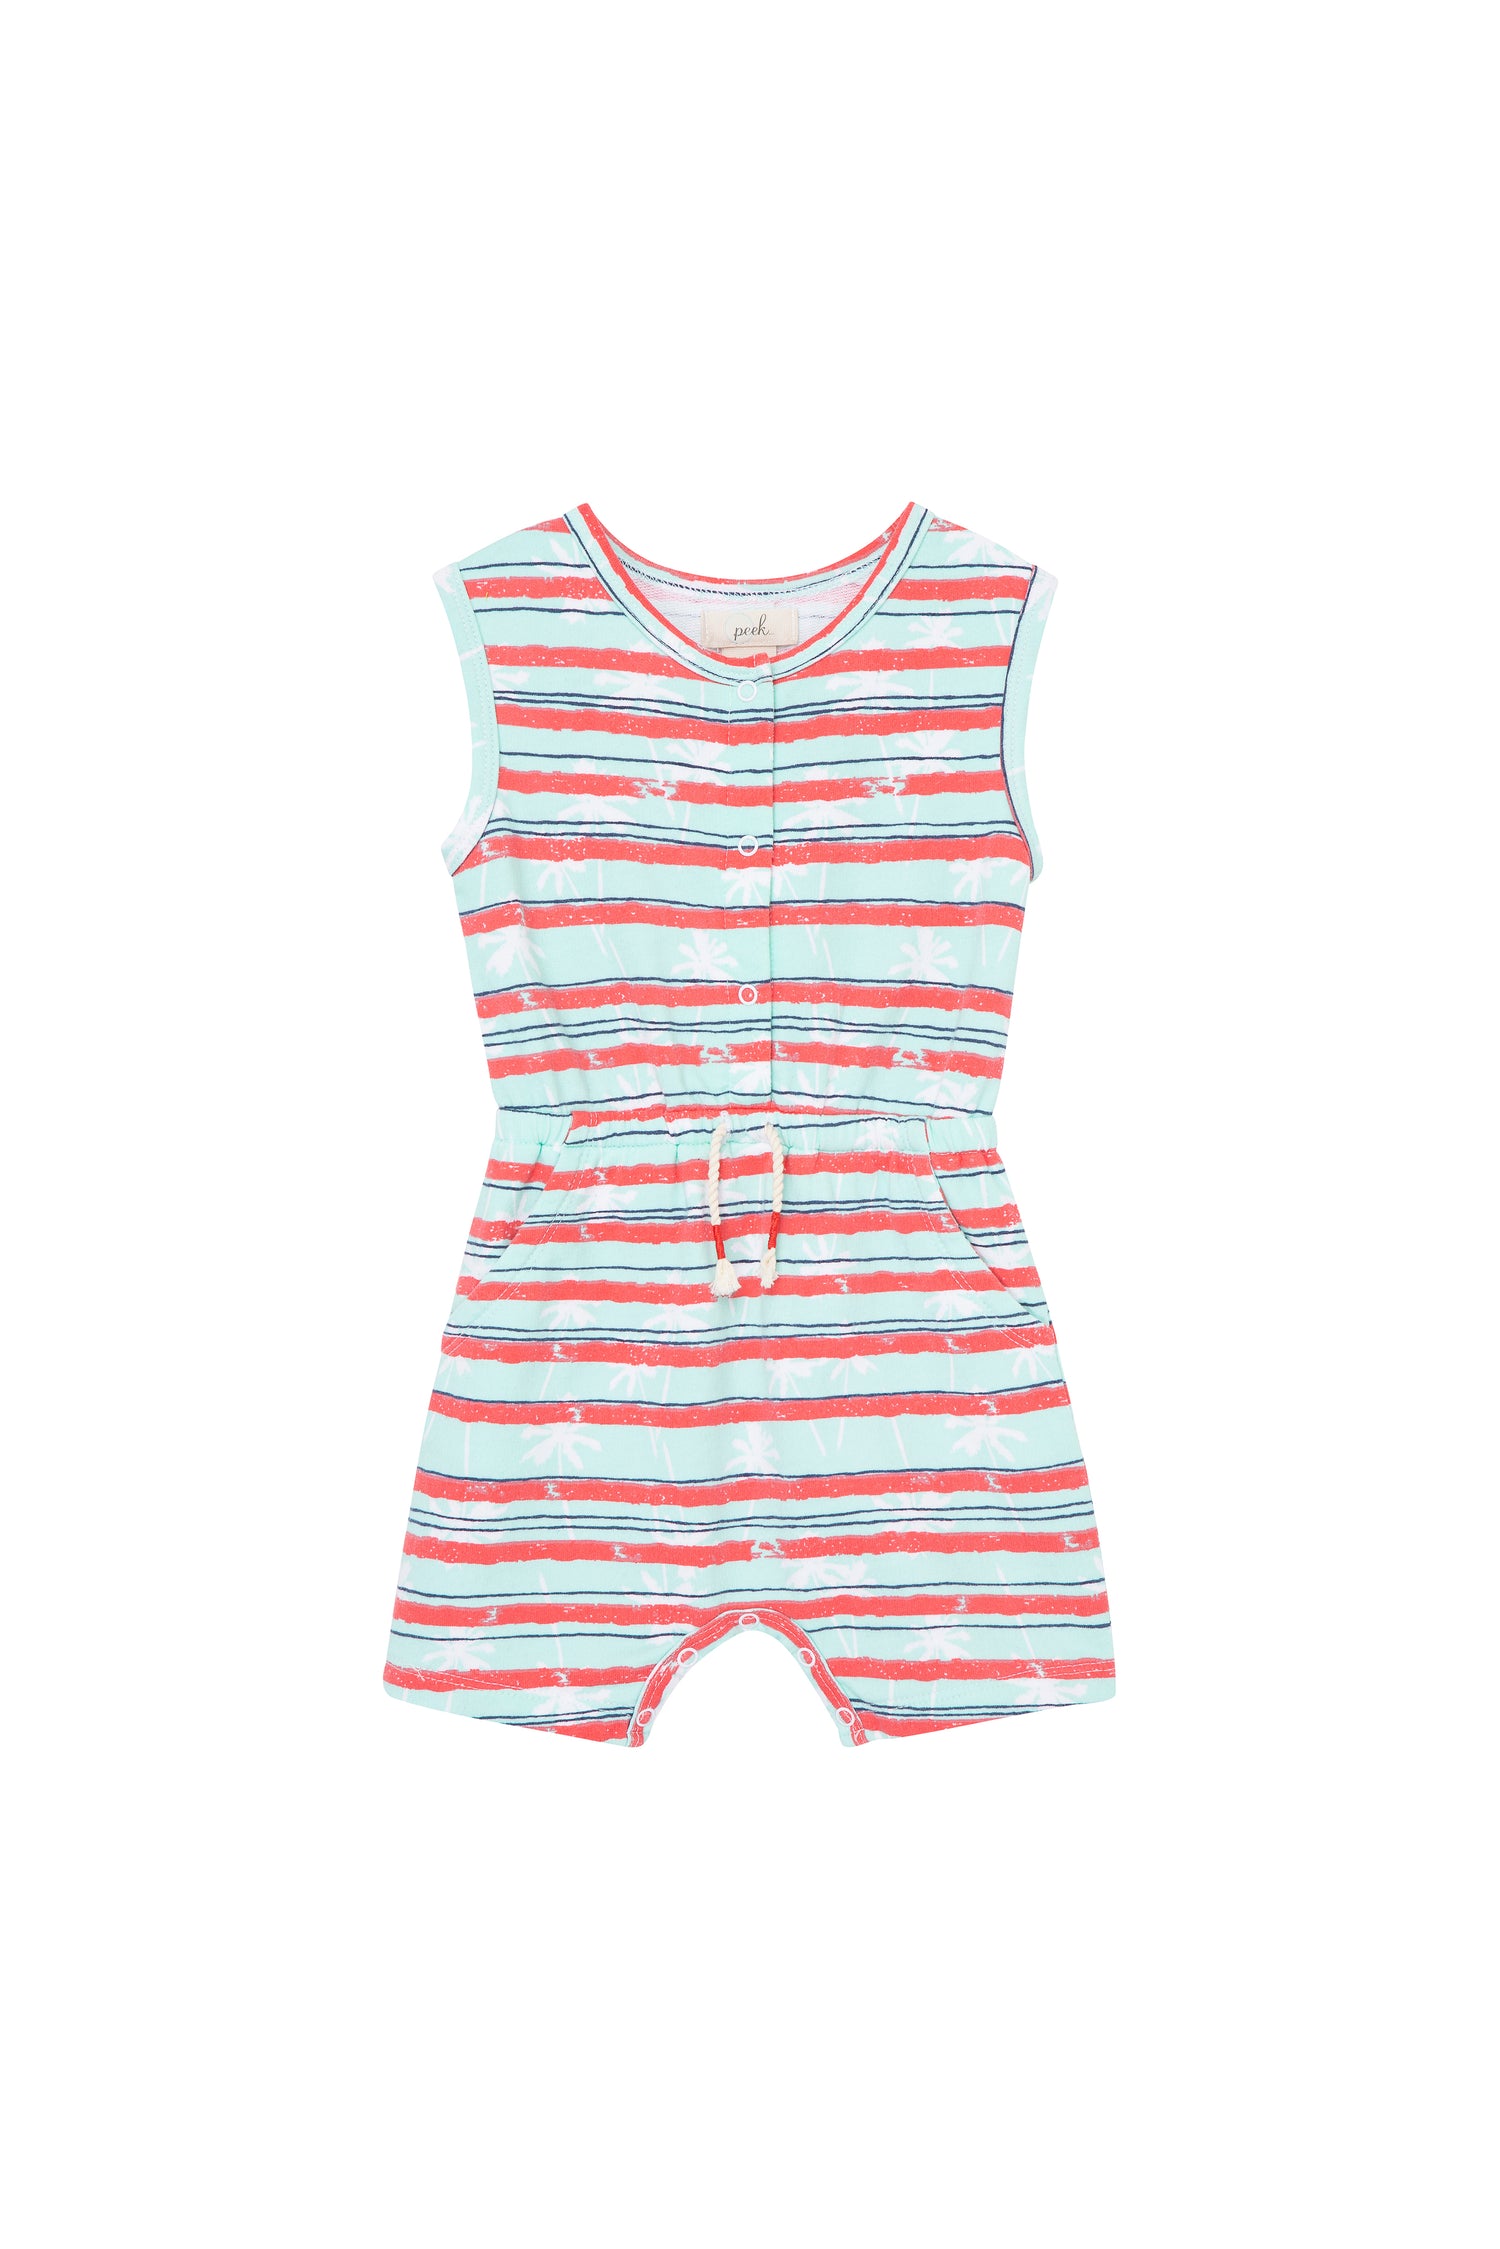 BLUE AND RED STRIPED ROMPER WITH WHITE PALM TREES